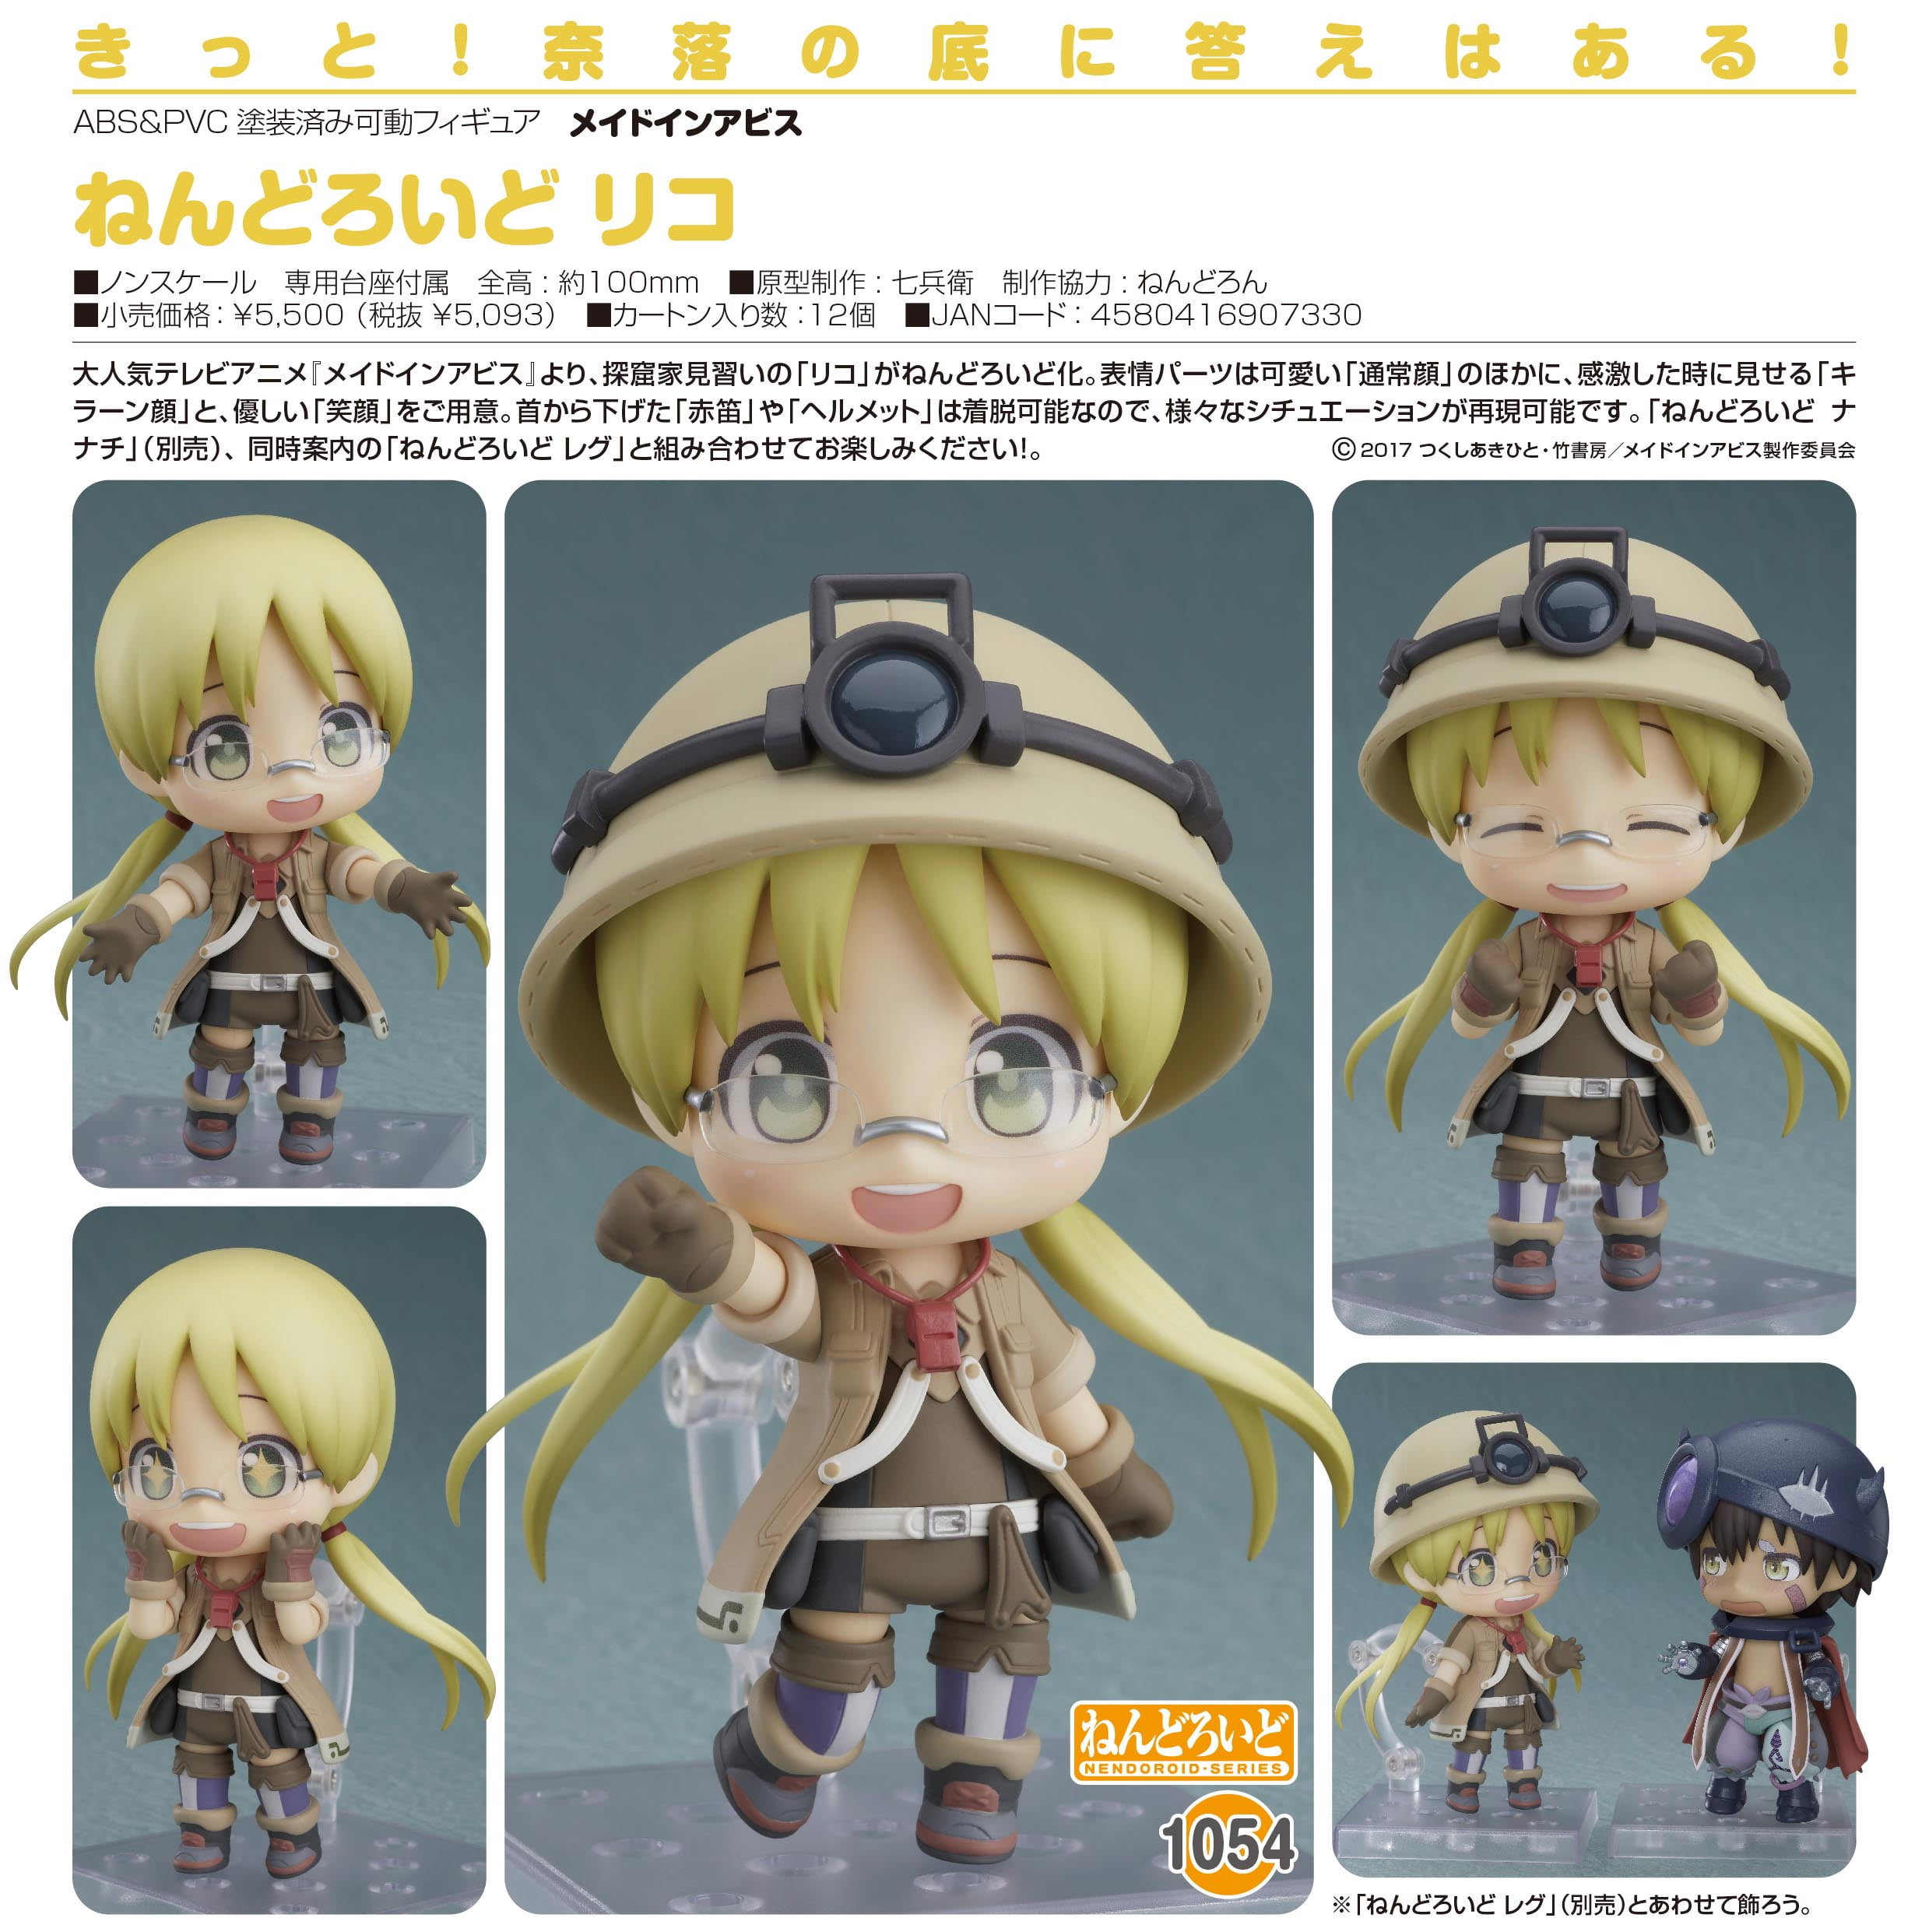 NENDOROID MADE IN ABYSS RIKO 